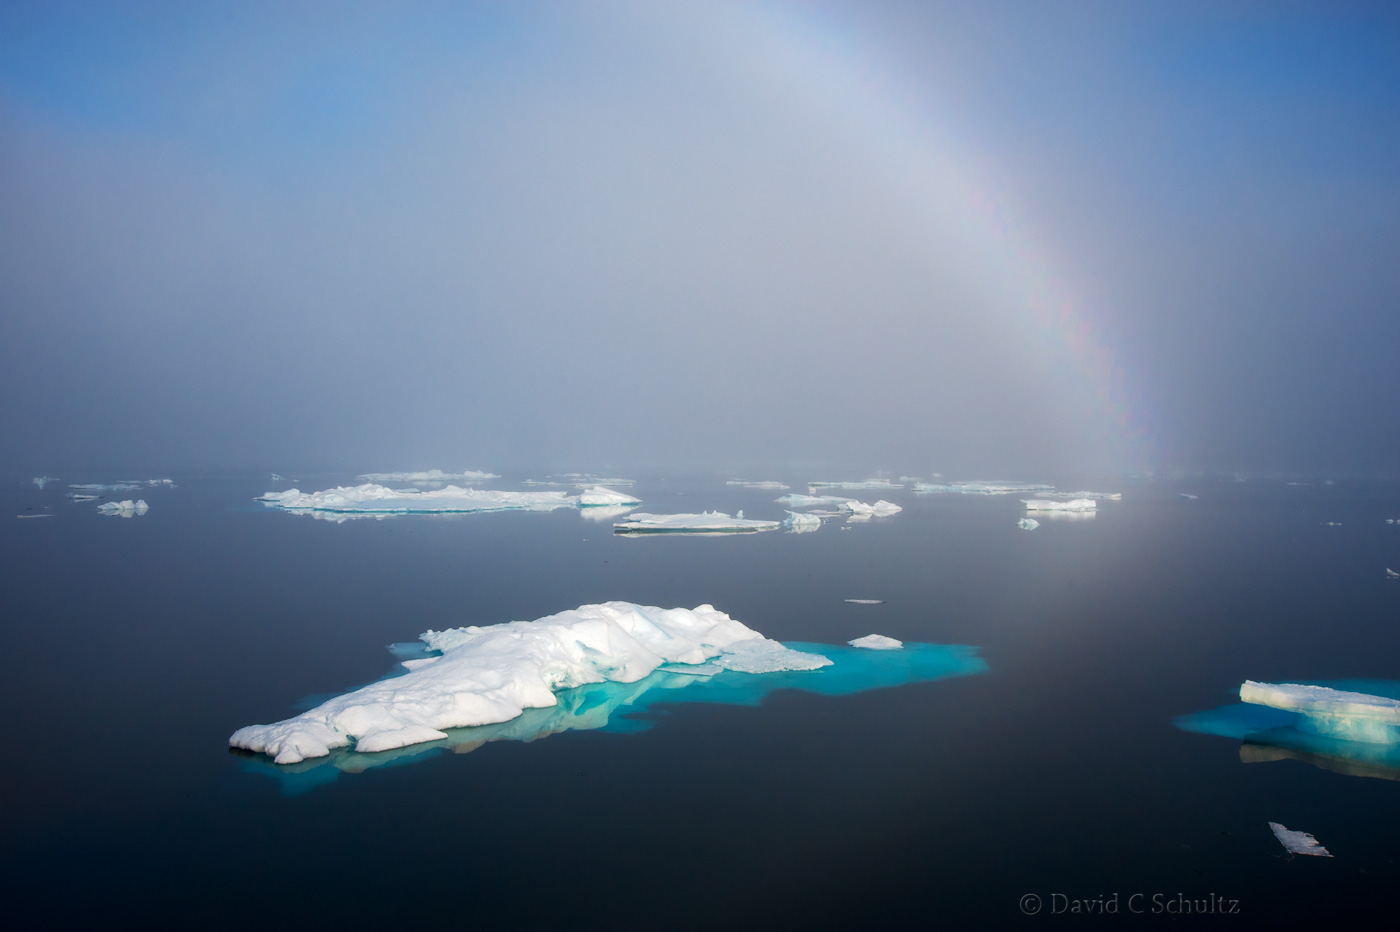 Icebergs in Baffin Bay - Image #167-0626